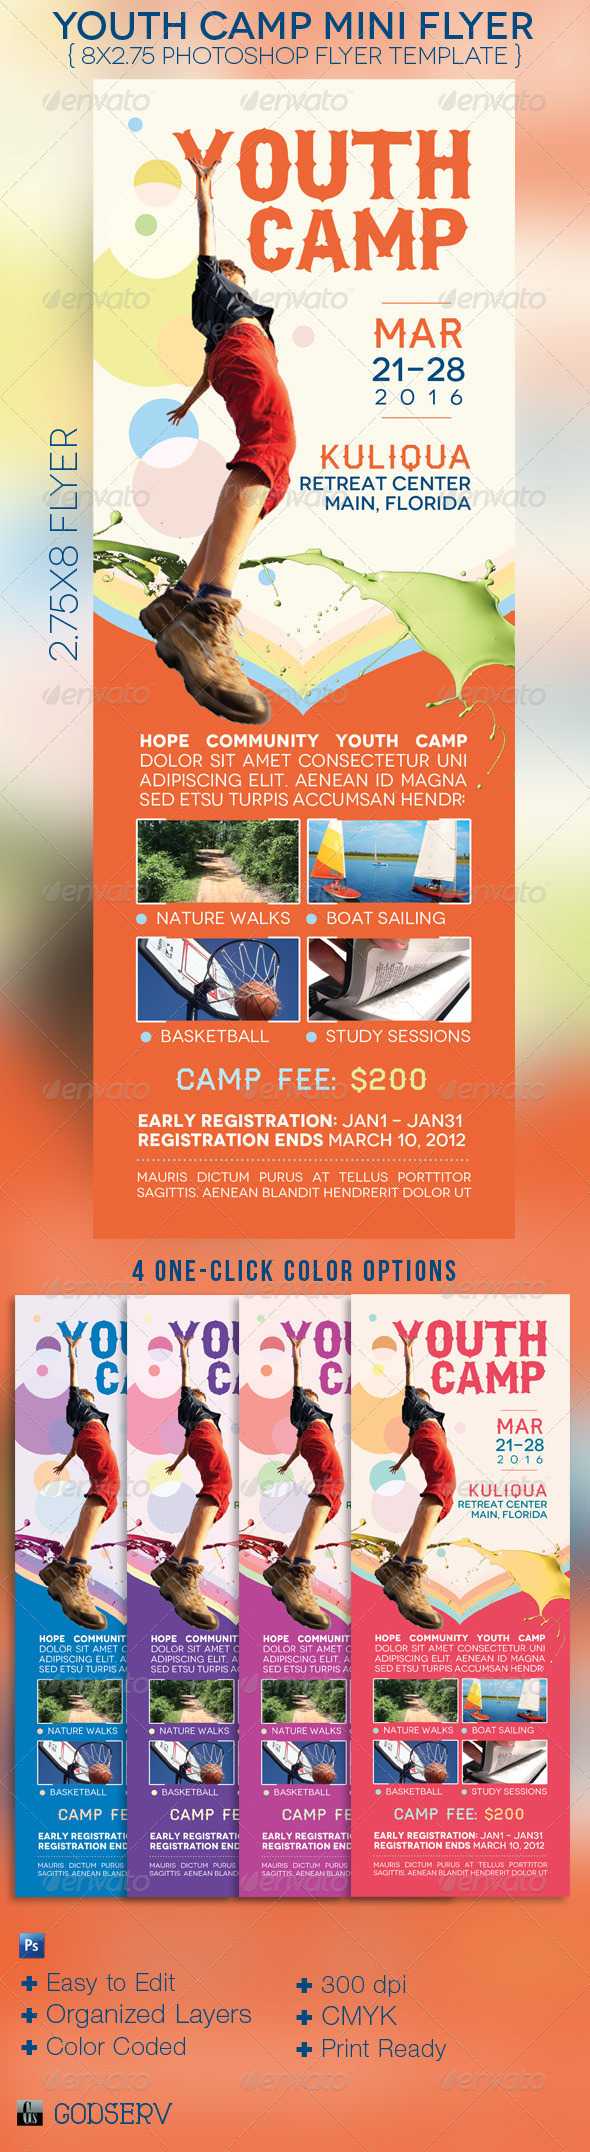 Youth Camp Mini Flyer Template On Behance Regarding Football Camp Flyer Template